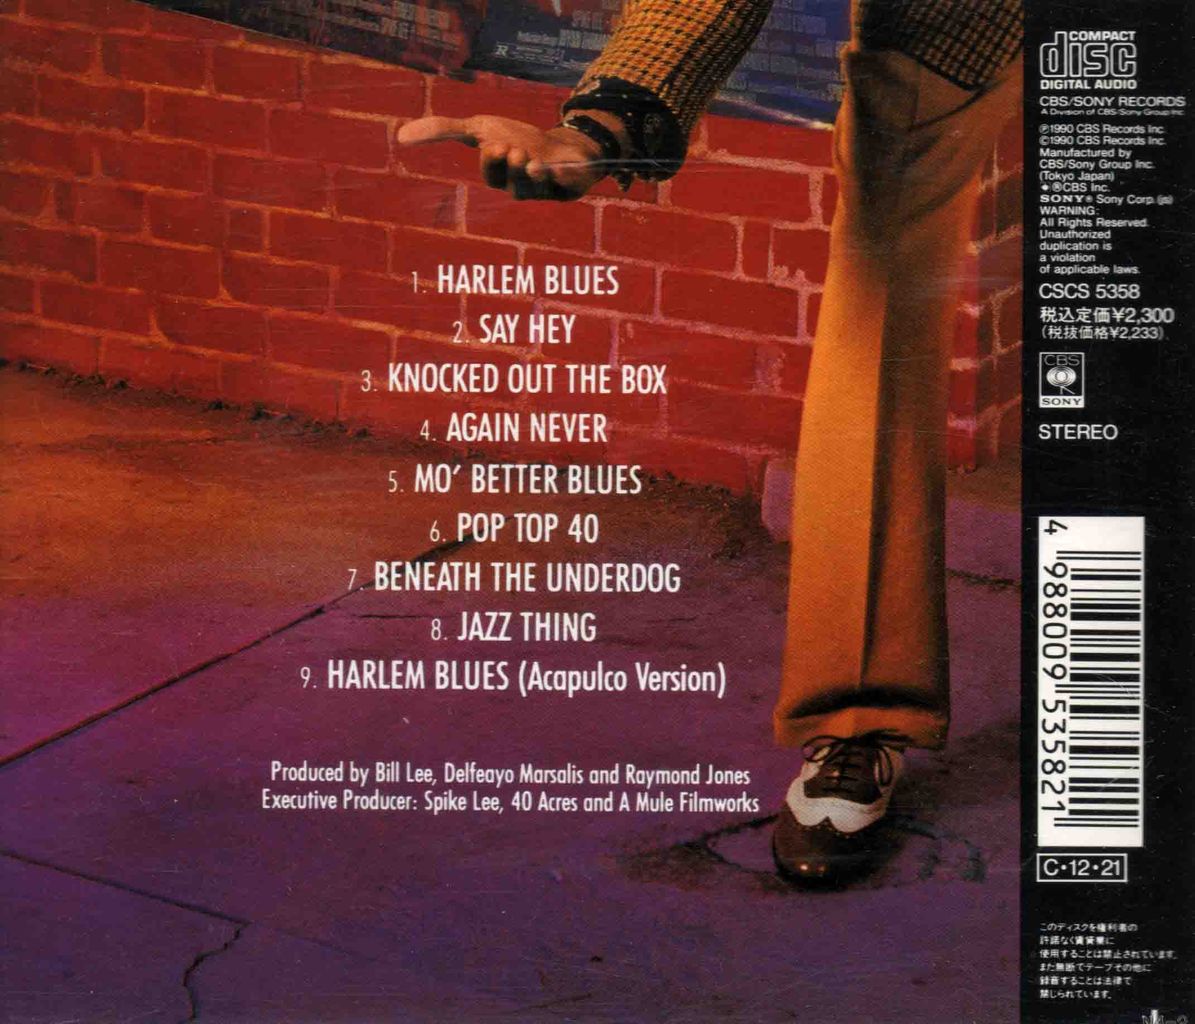 MUSIC FROM MO' BETTER BLUES-1